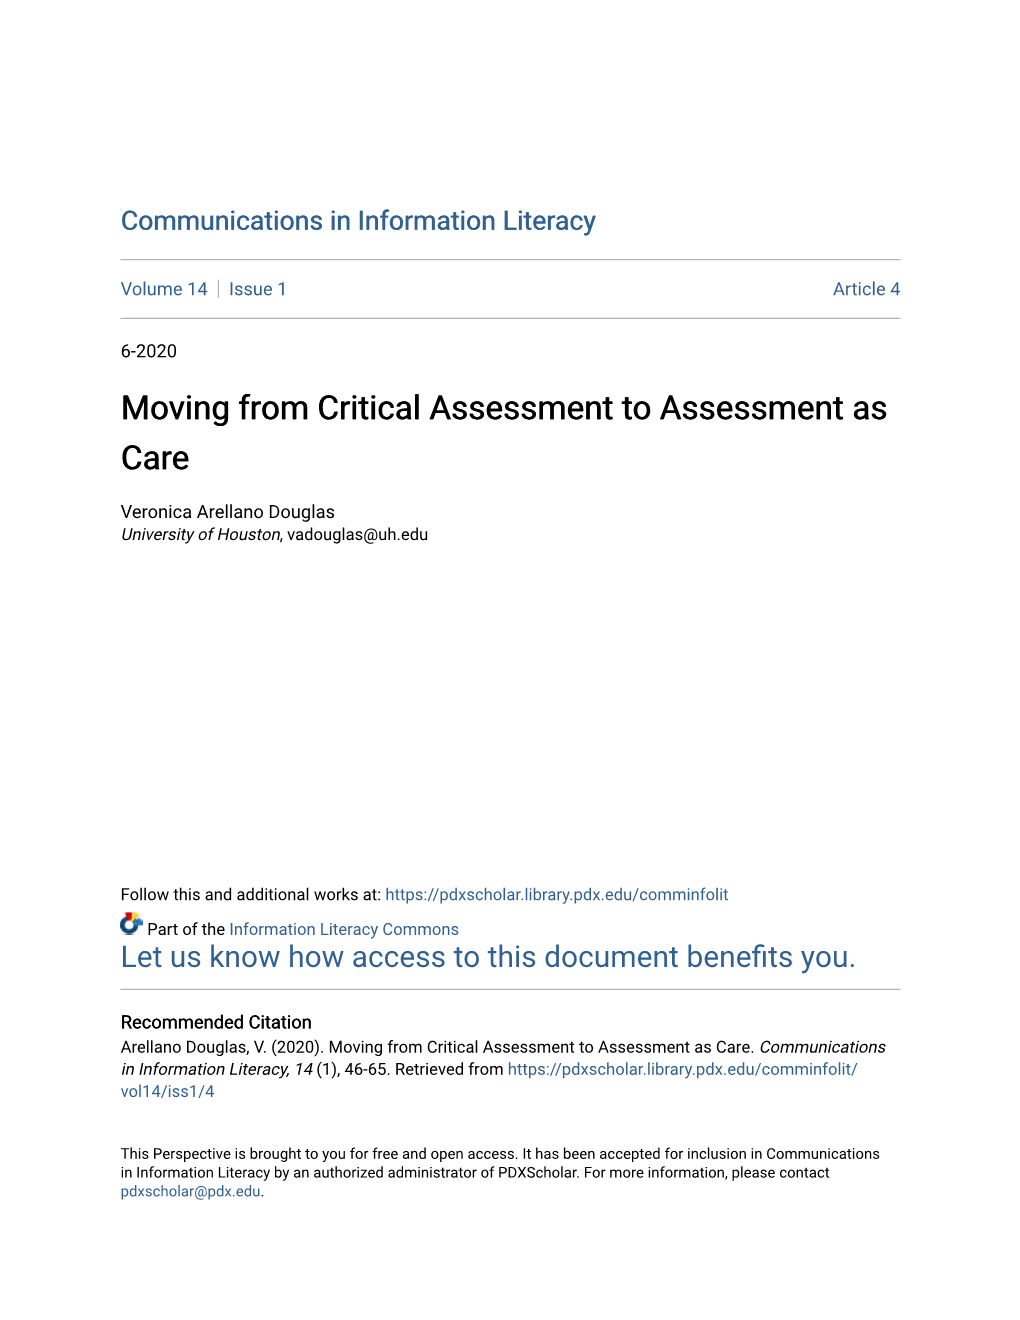 Moving from Critical Assessment to Assessment As Care